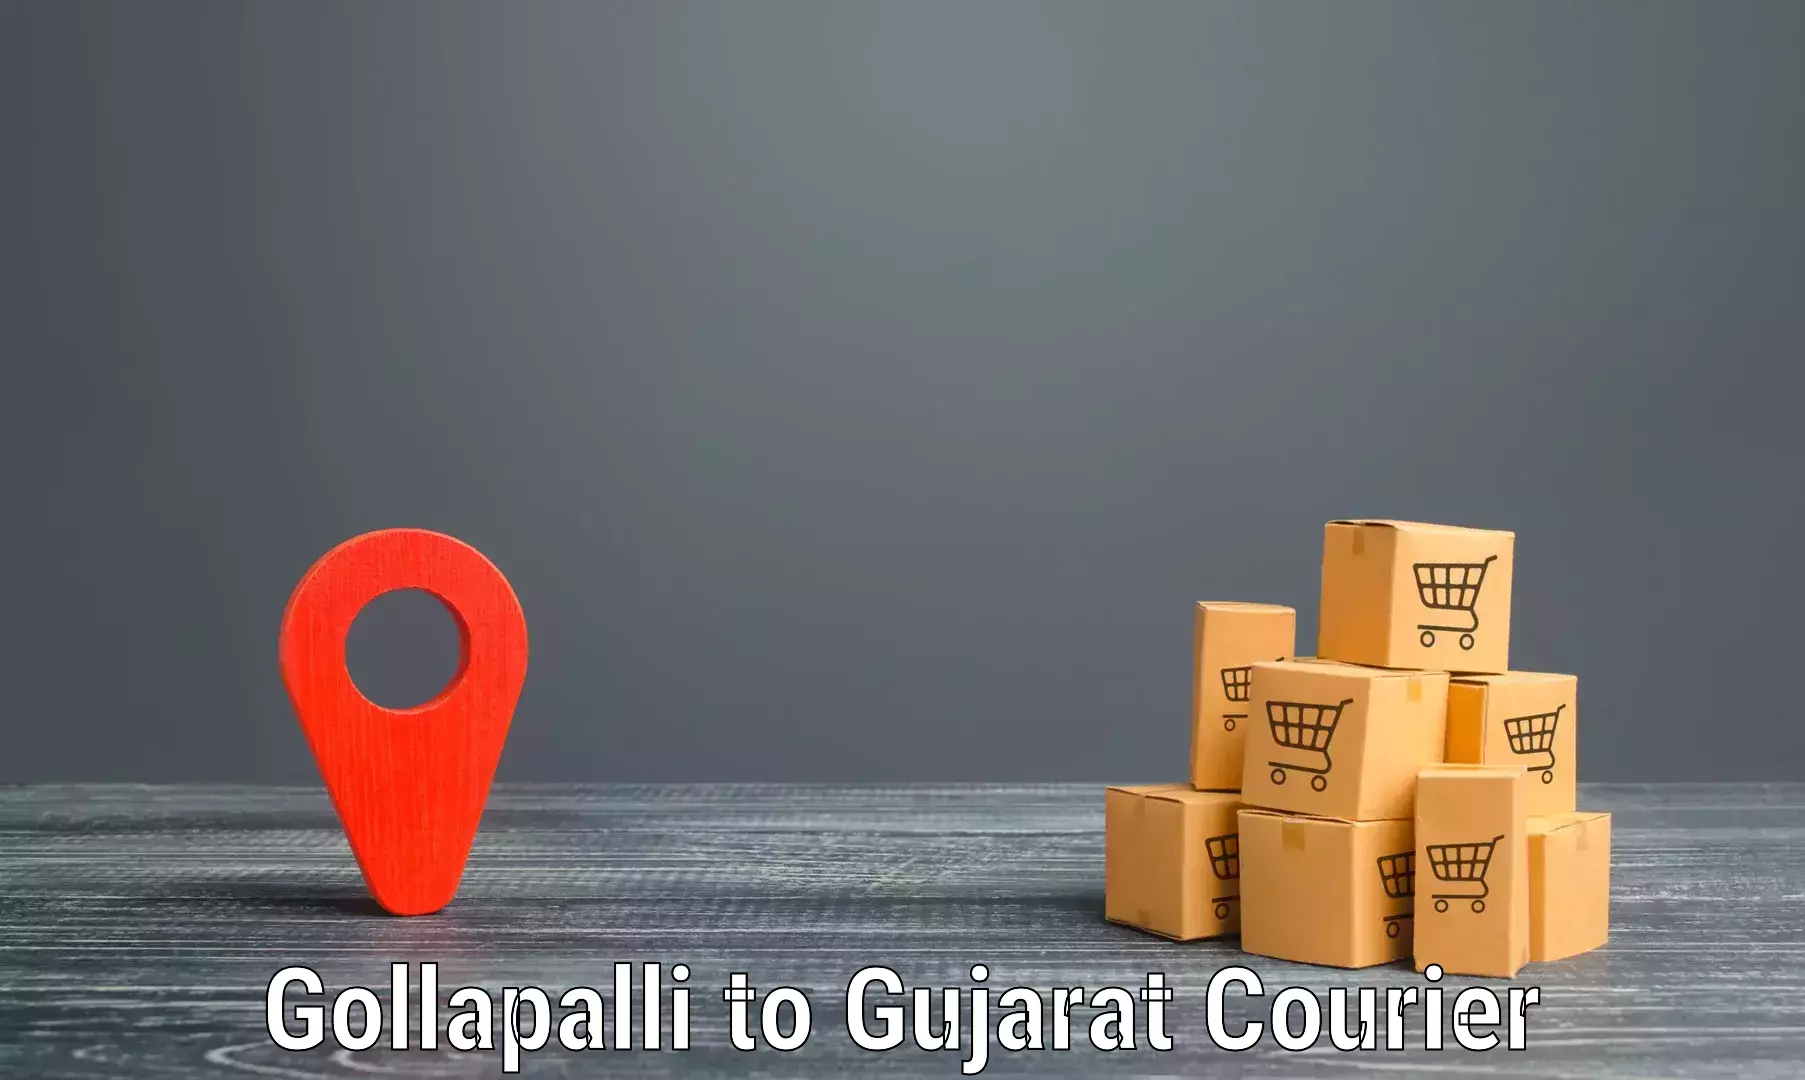 Express delivery network Gollapalli to Morbi